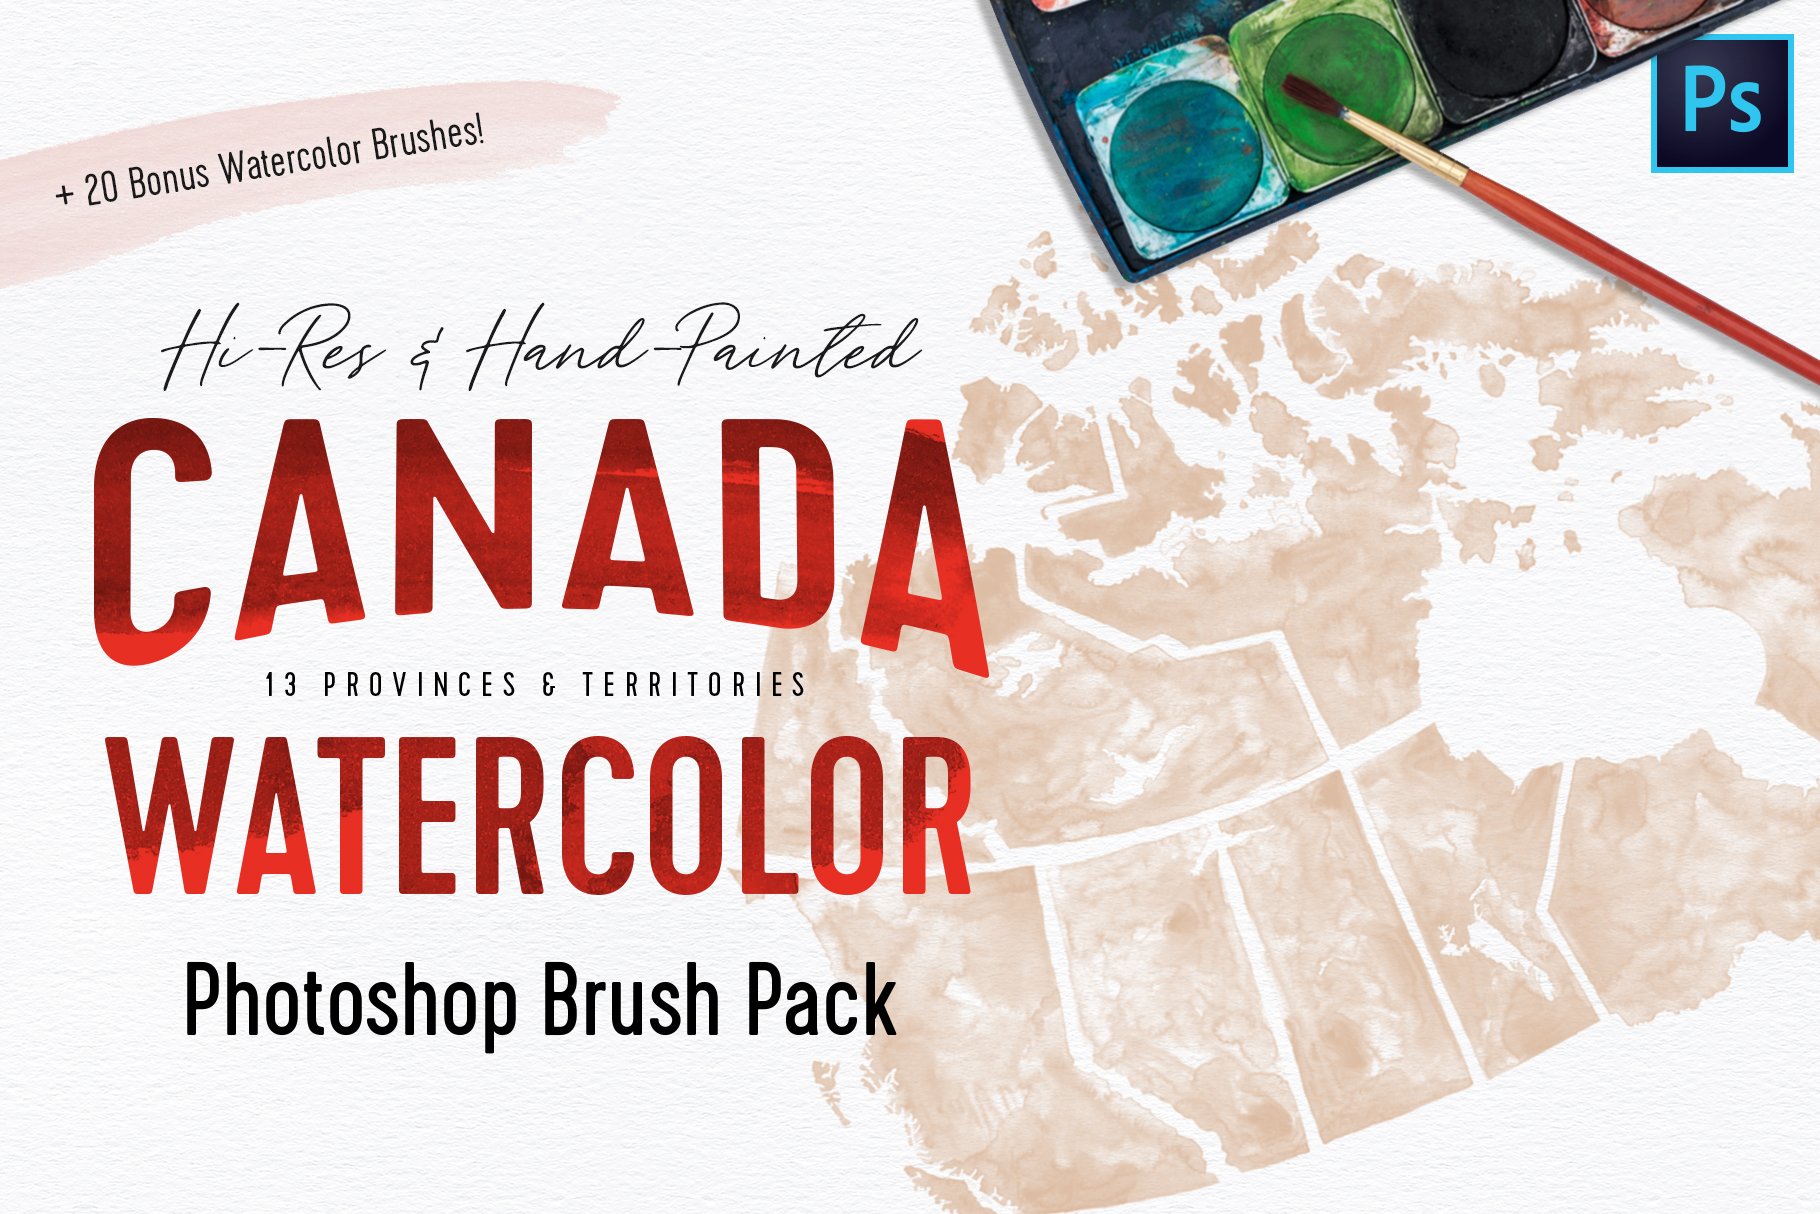 Canada Watercolor PS Brushescover image.